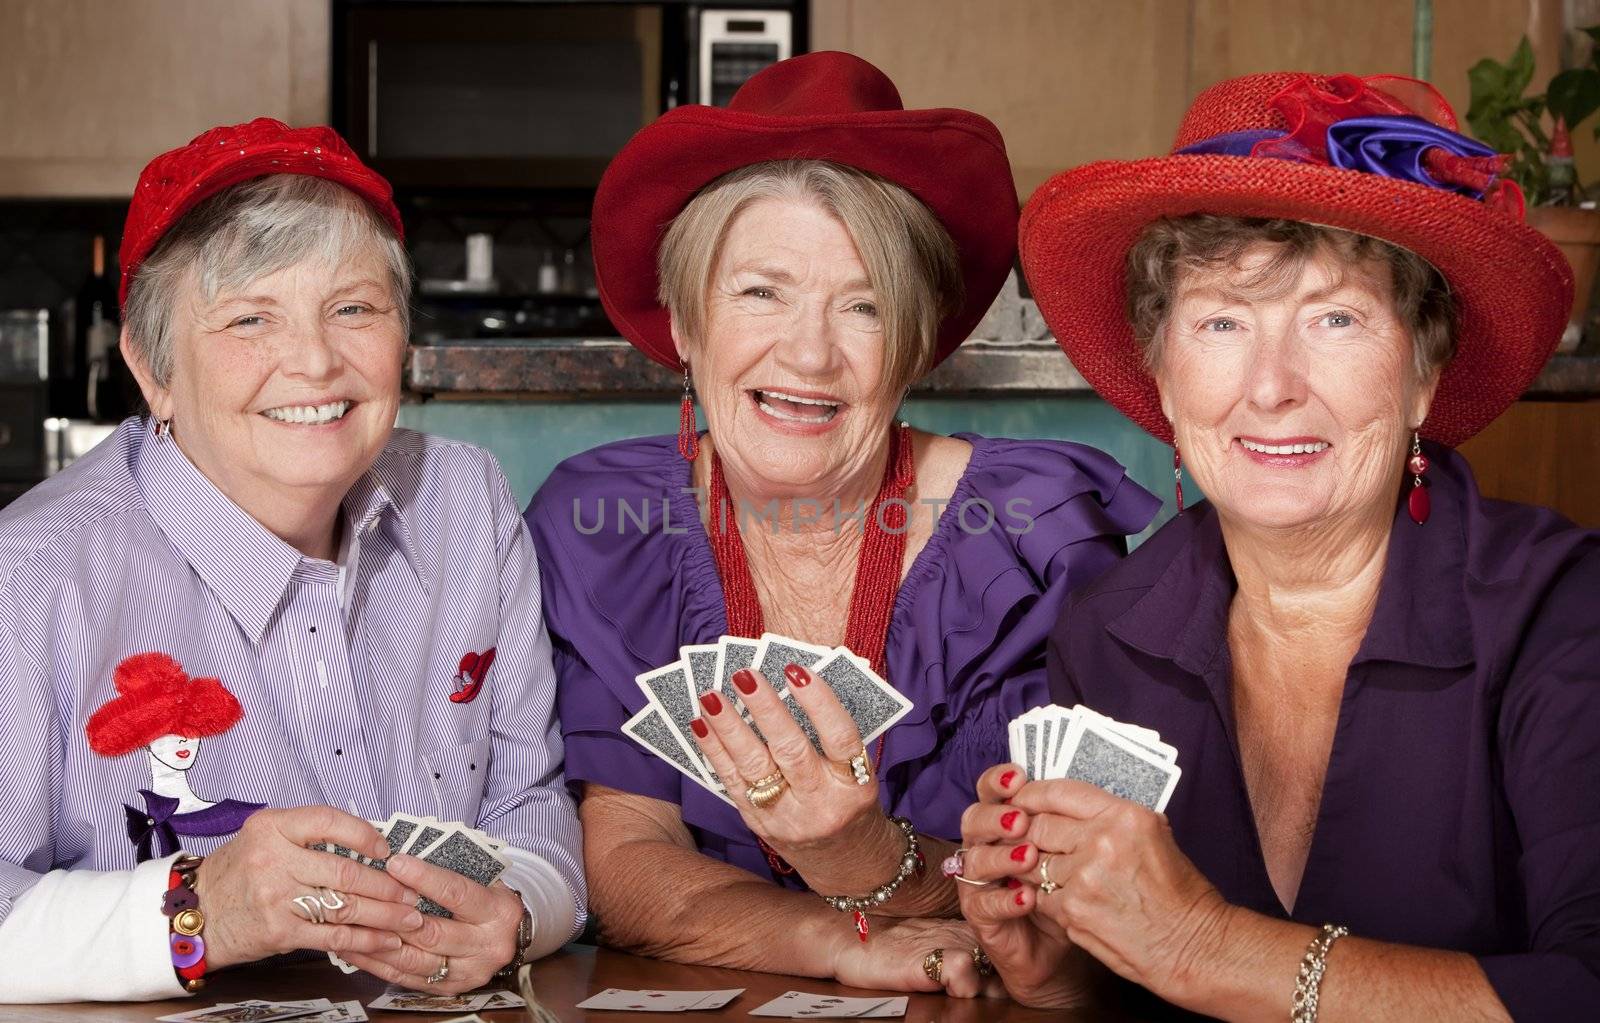 Ladies wearing red hats playing a hand of cards